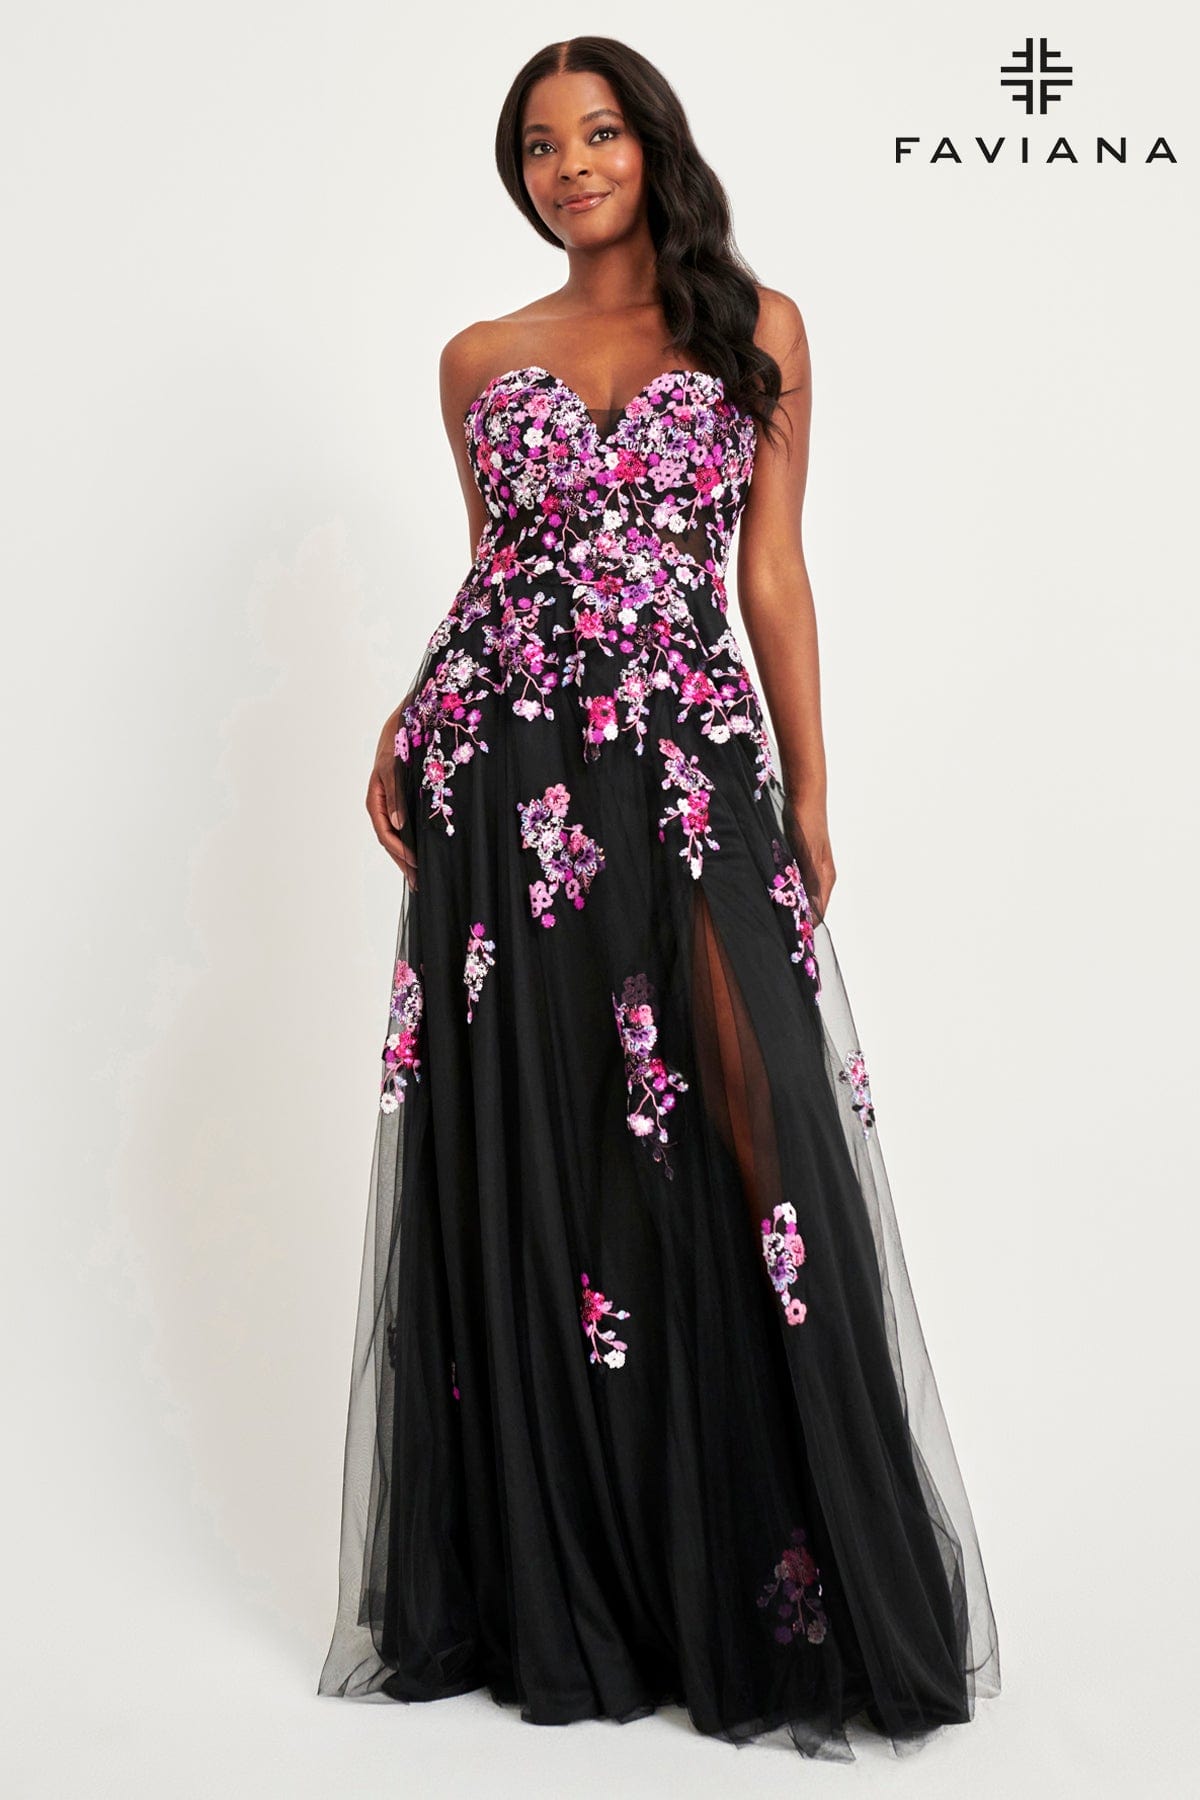 Strapless Corset Dress With Flowy Tulle Skirt And Floral Applique | 11028